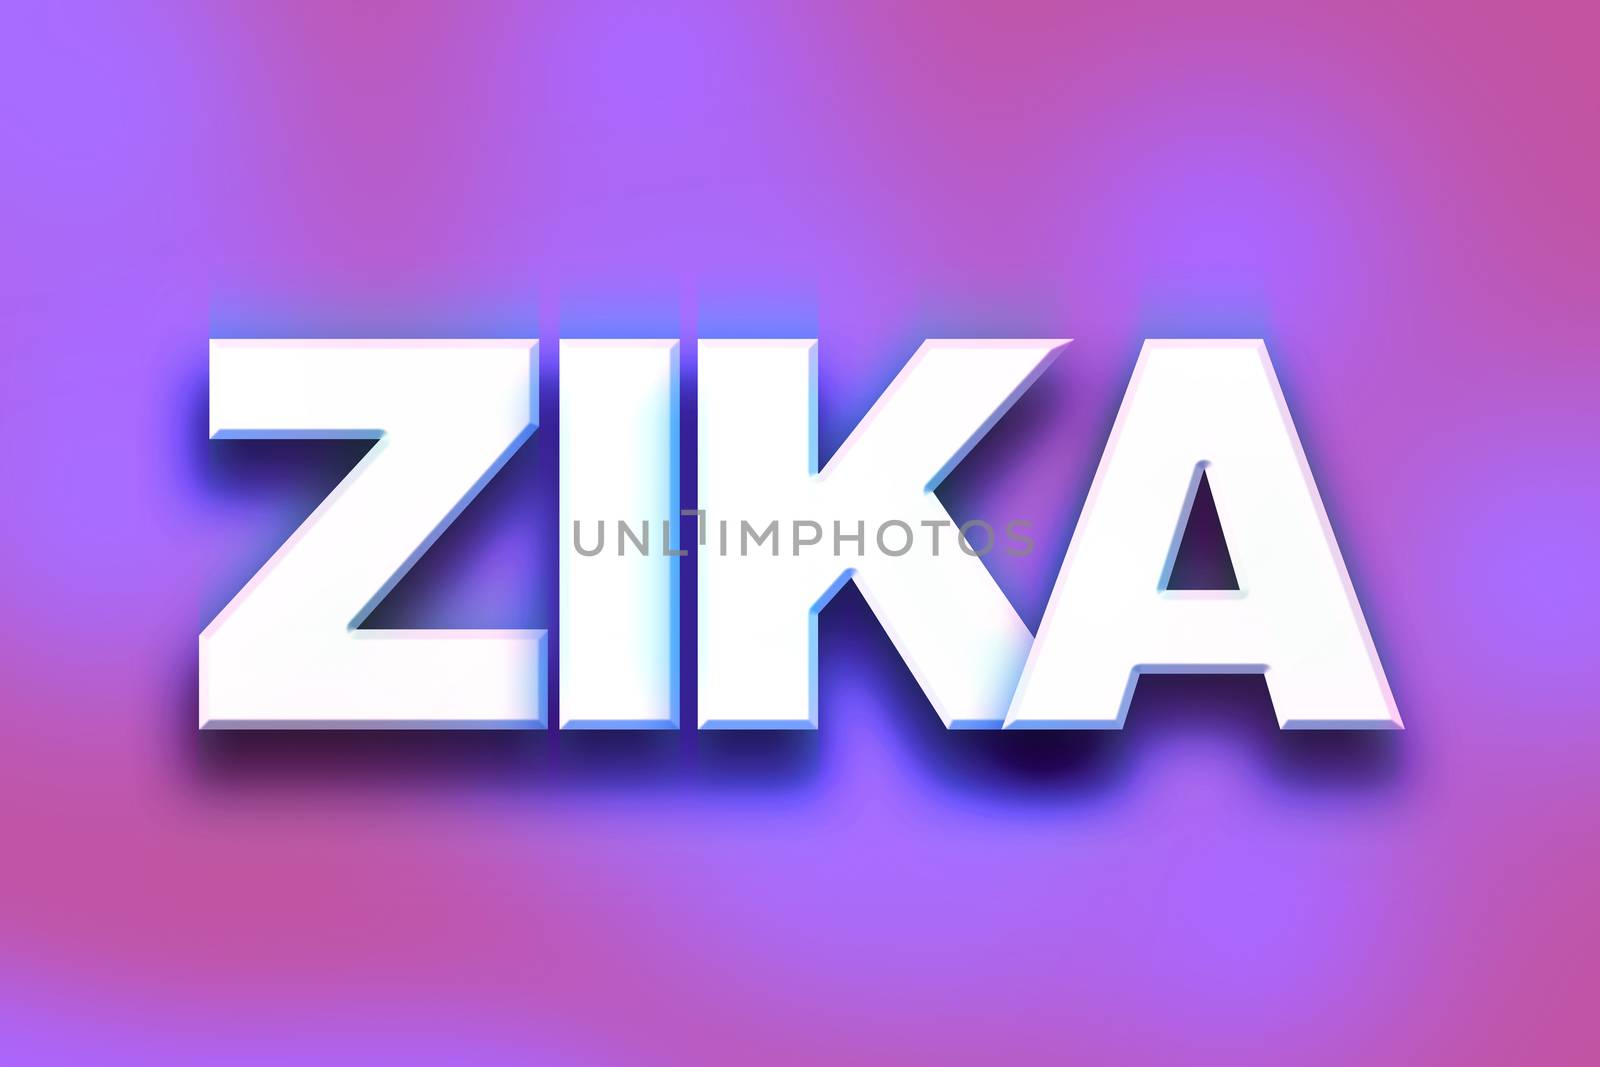 The word "Zika" written in white 3D letters on a colorful background concept and theme.